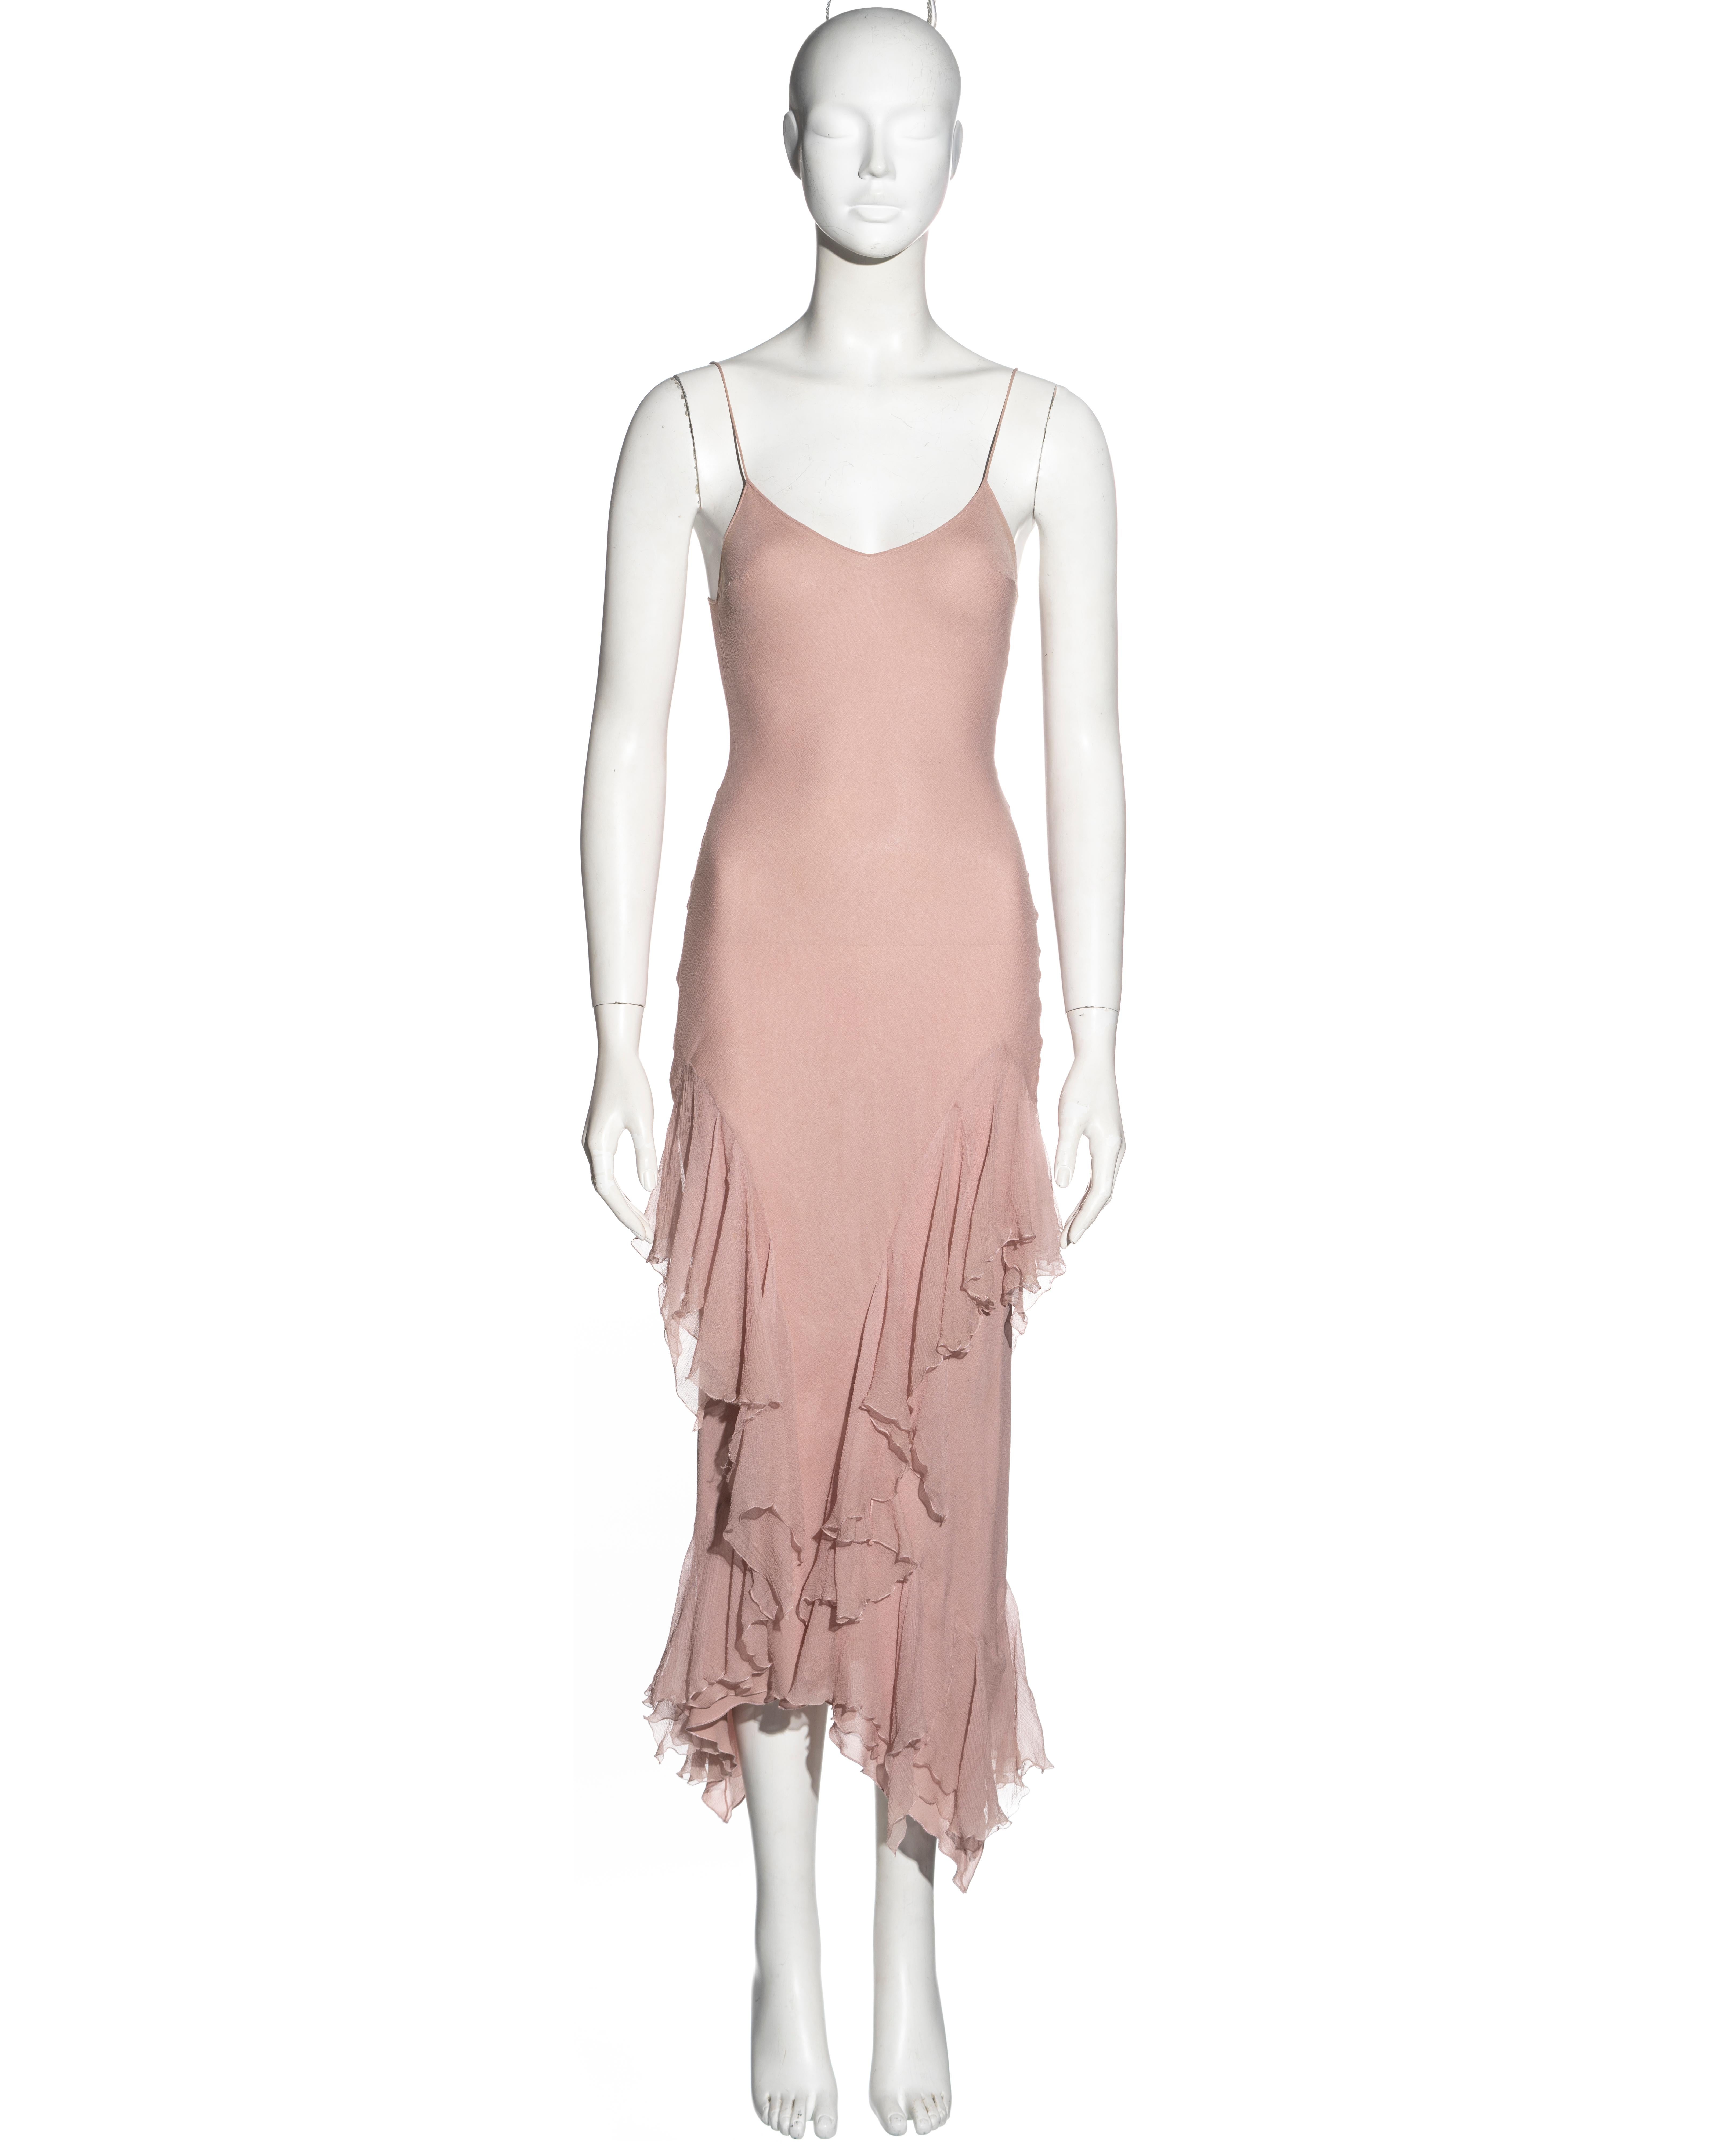 ▪ John Galliano evening dress
▪ Sold by One of a Kind Archive
▪ Constructed from bias-cut pale pink silk chiffon 
▪ Asymmetric ruffled skirt
▪ V-neck
▪ Spaghetti straps 
▪ FR 38 - UK 10 - US 6
▪ Fall-Winter 1997
▪ 100% Silk
▪ Made in France

All